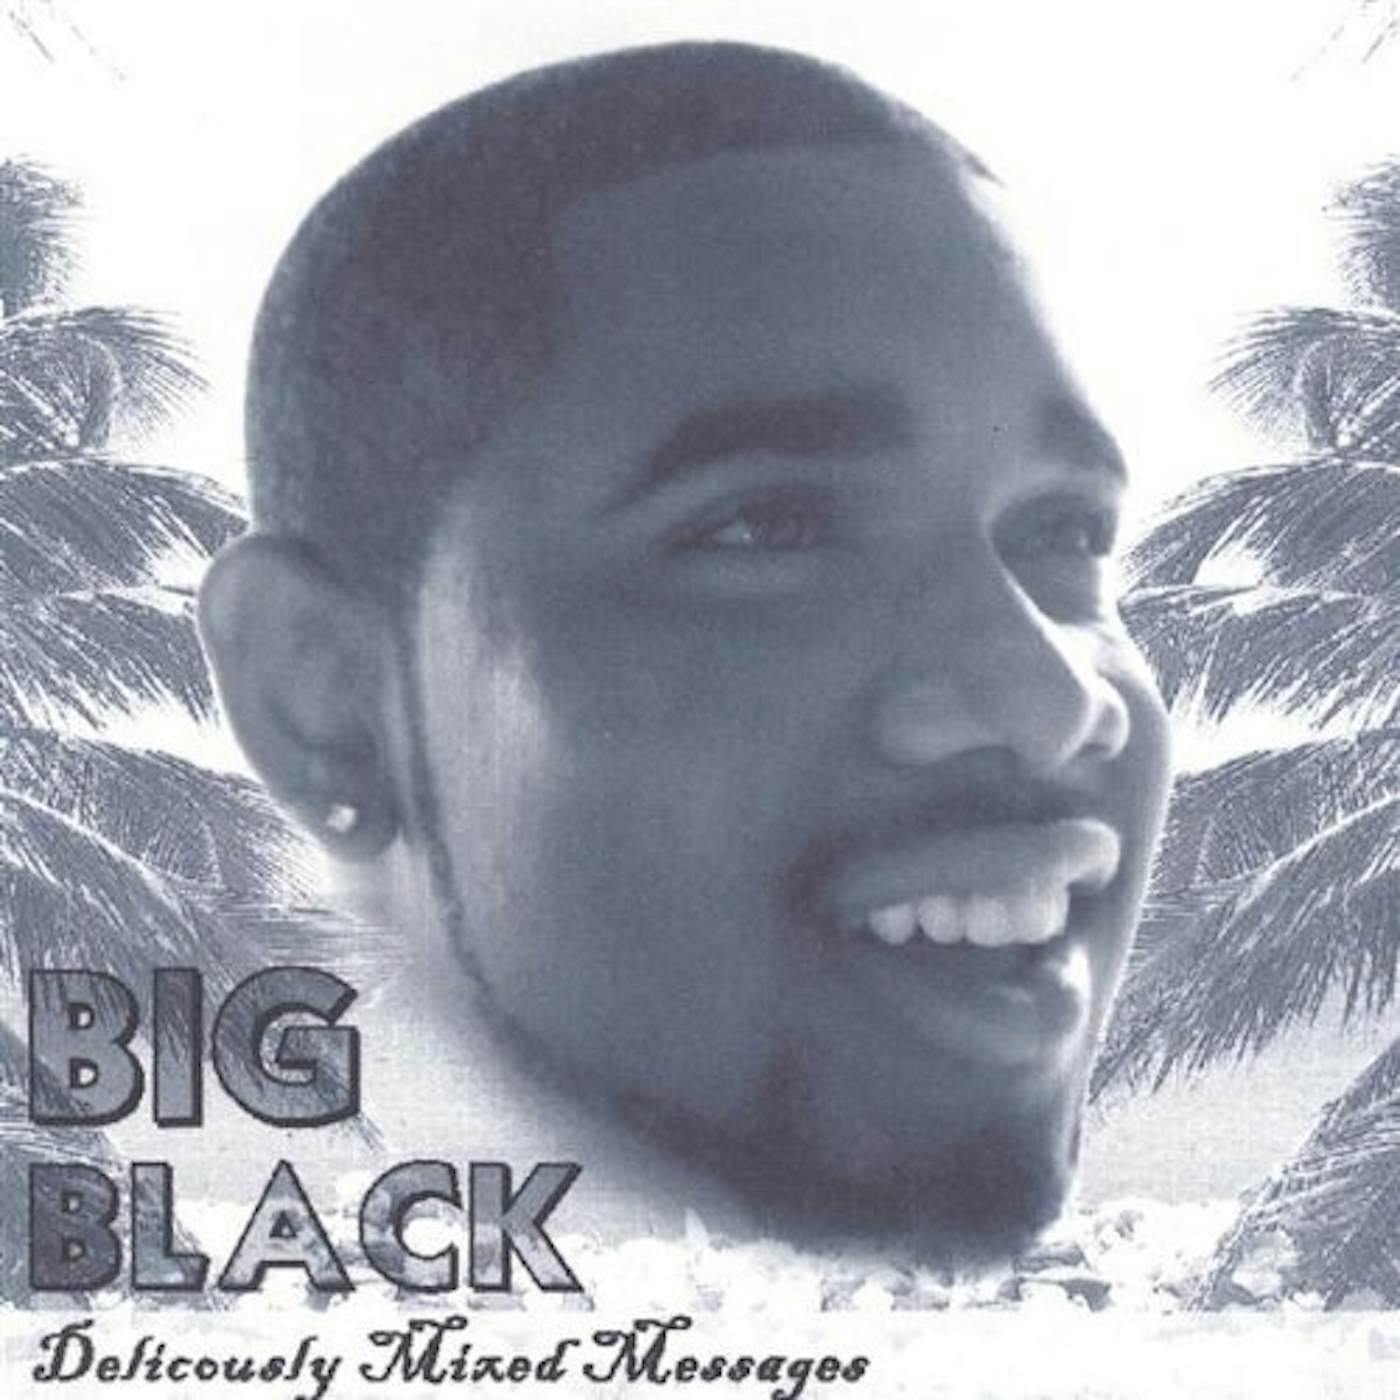 Big Black DELICIOUSLY MIXED MESSAGES CD